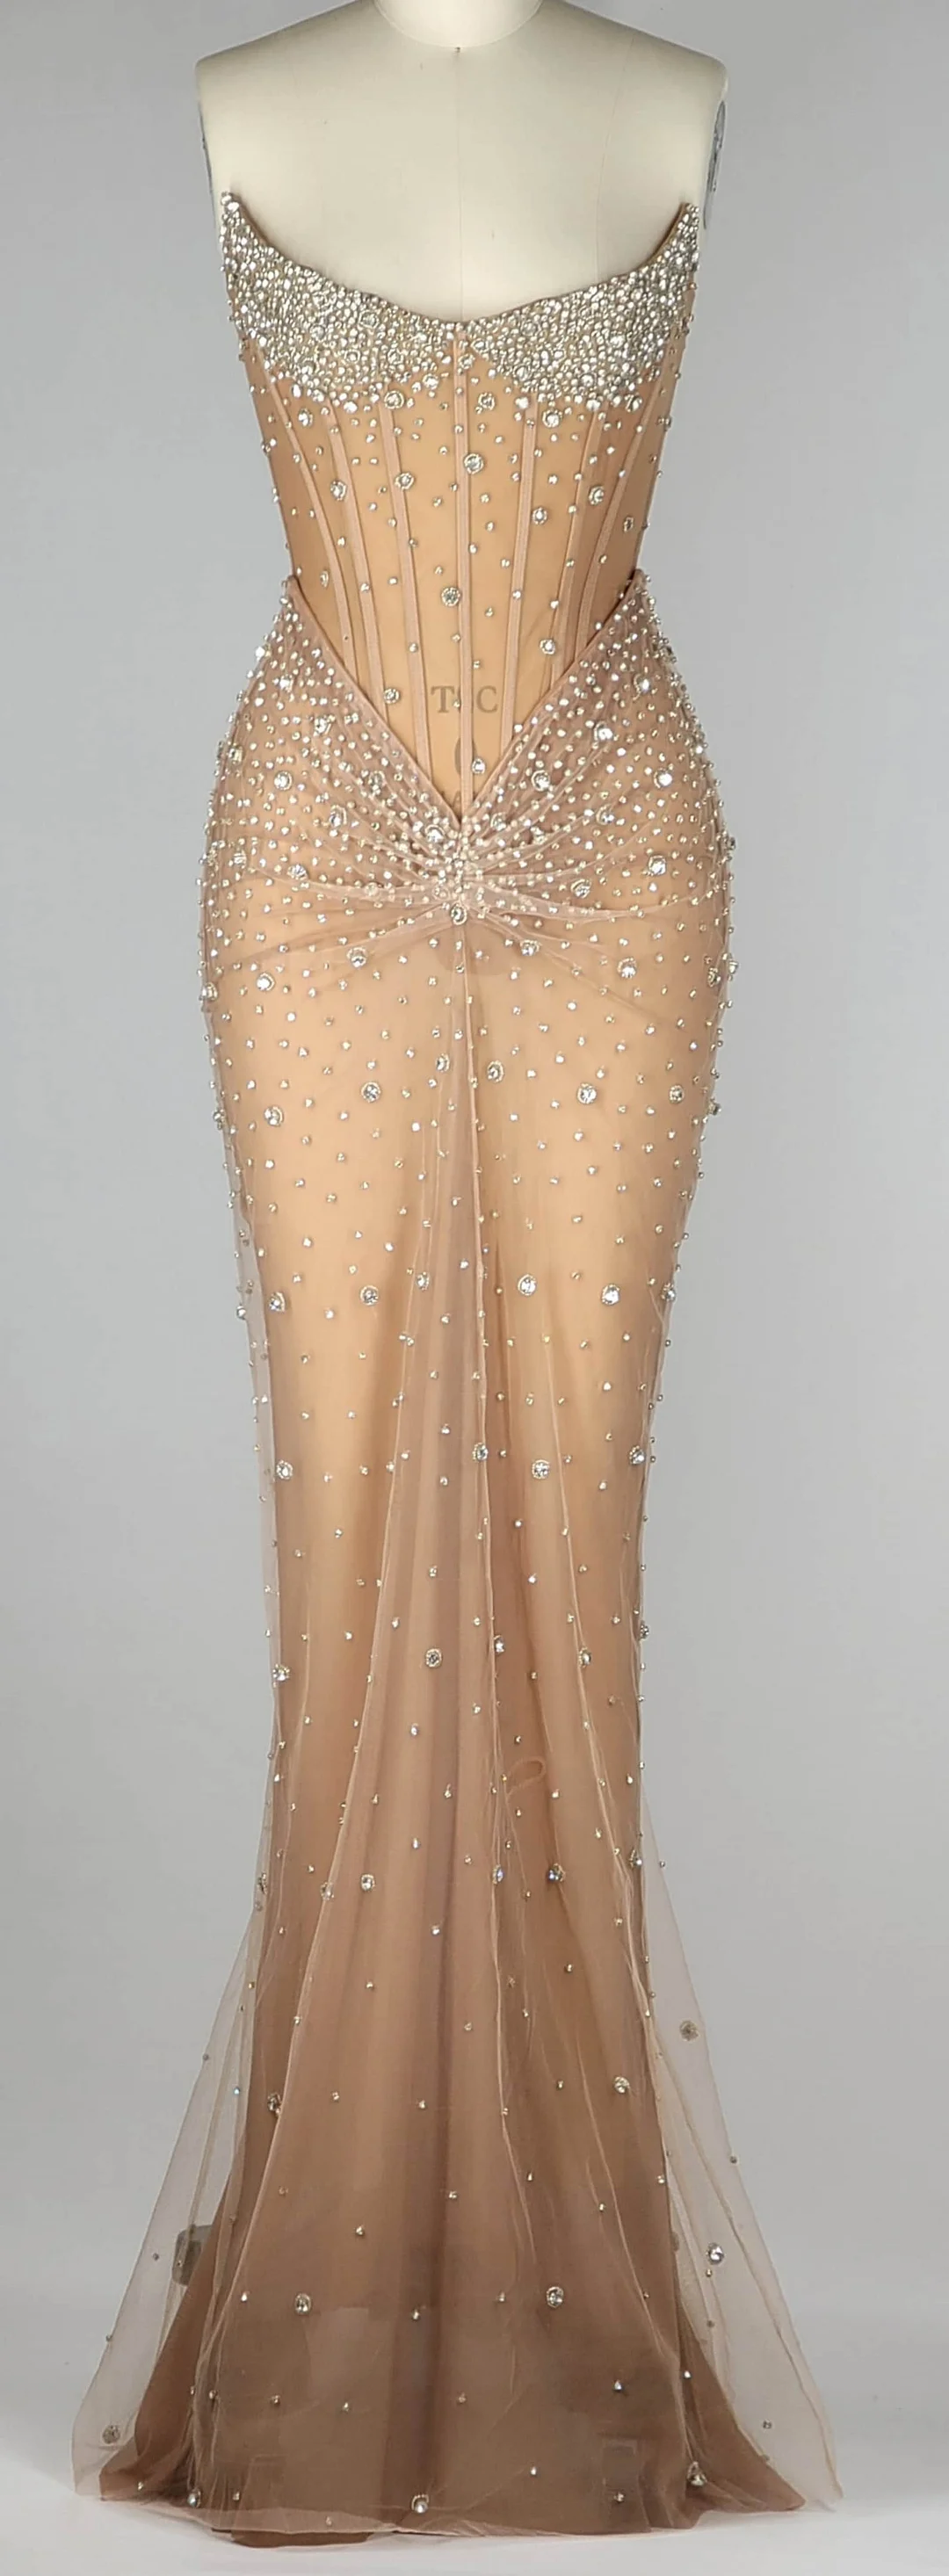 Luxurious Mermaid Crystal Beaded Hand Embroidered Corset Prom Dress YH0089